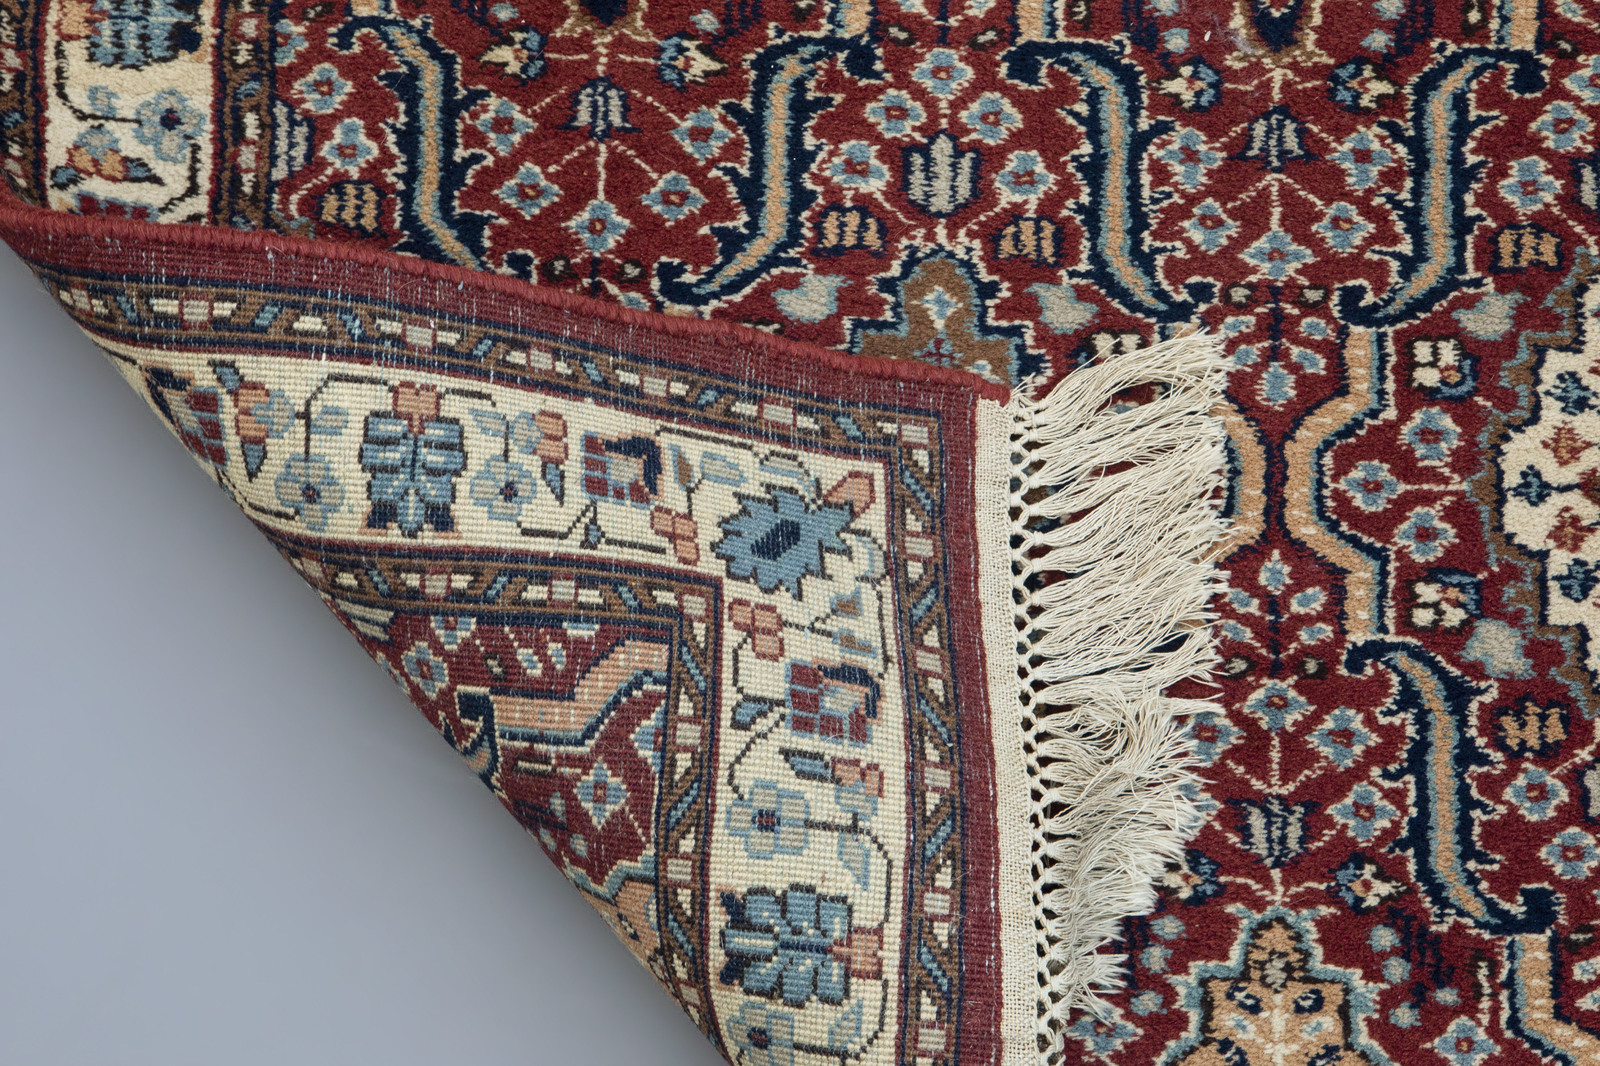 An Oriental runner with floral design, wool on cotton, 20th C. - Image 3 of 3